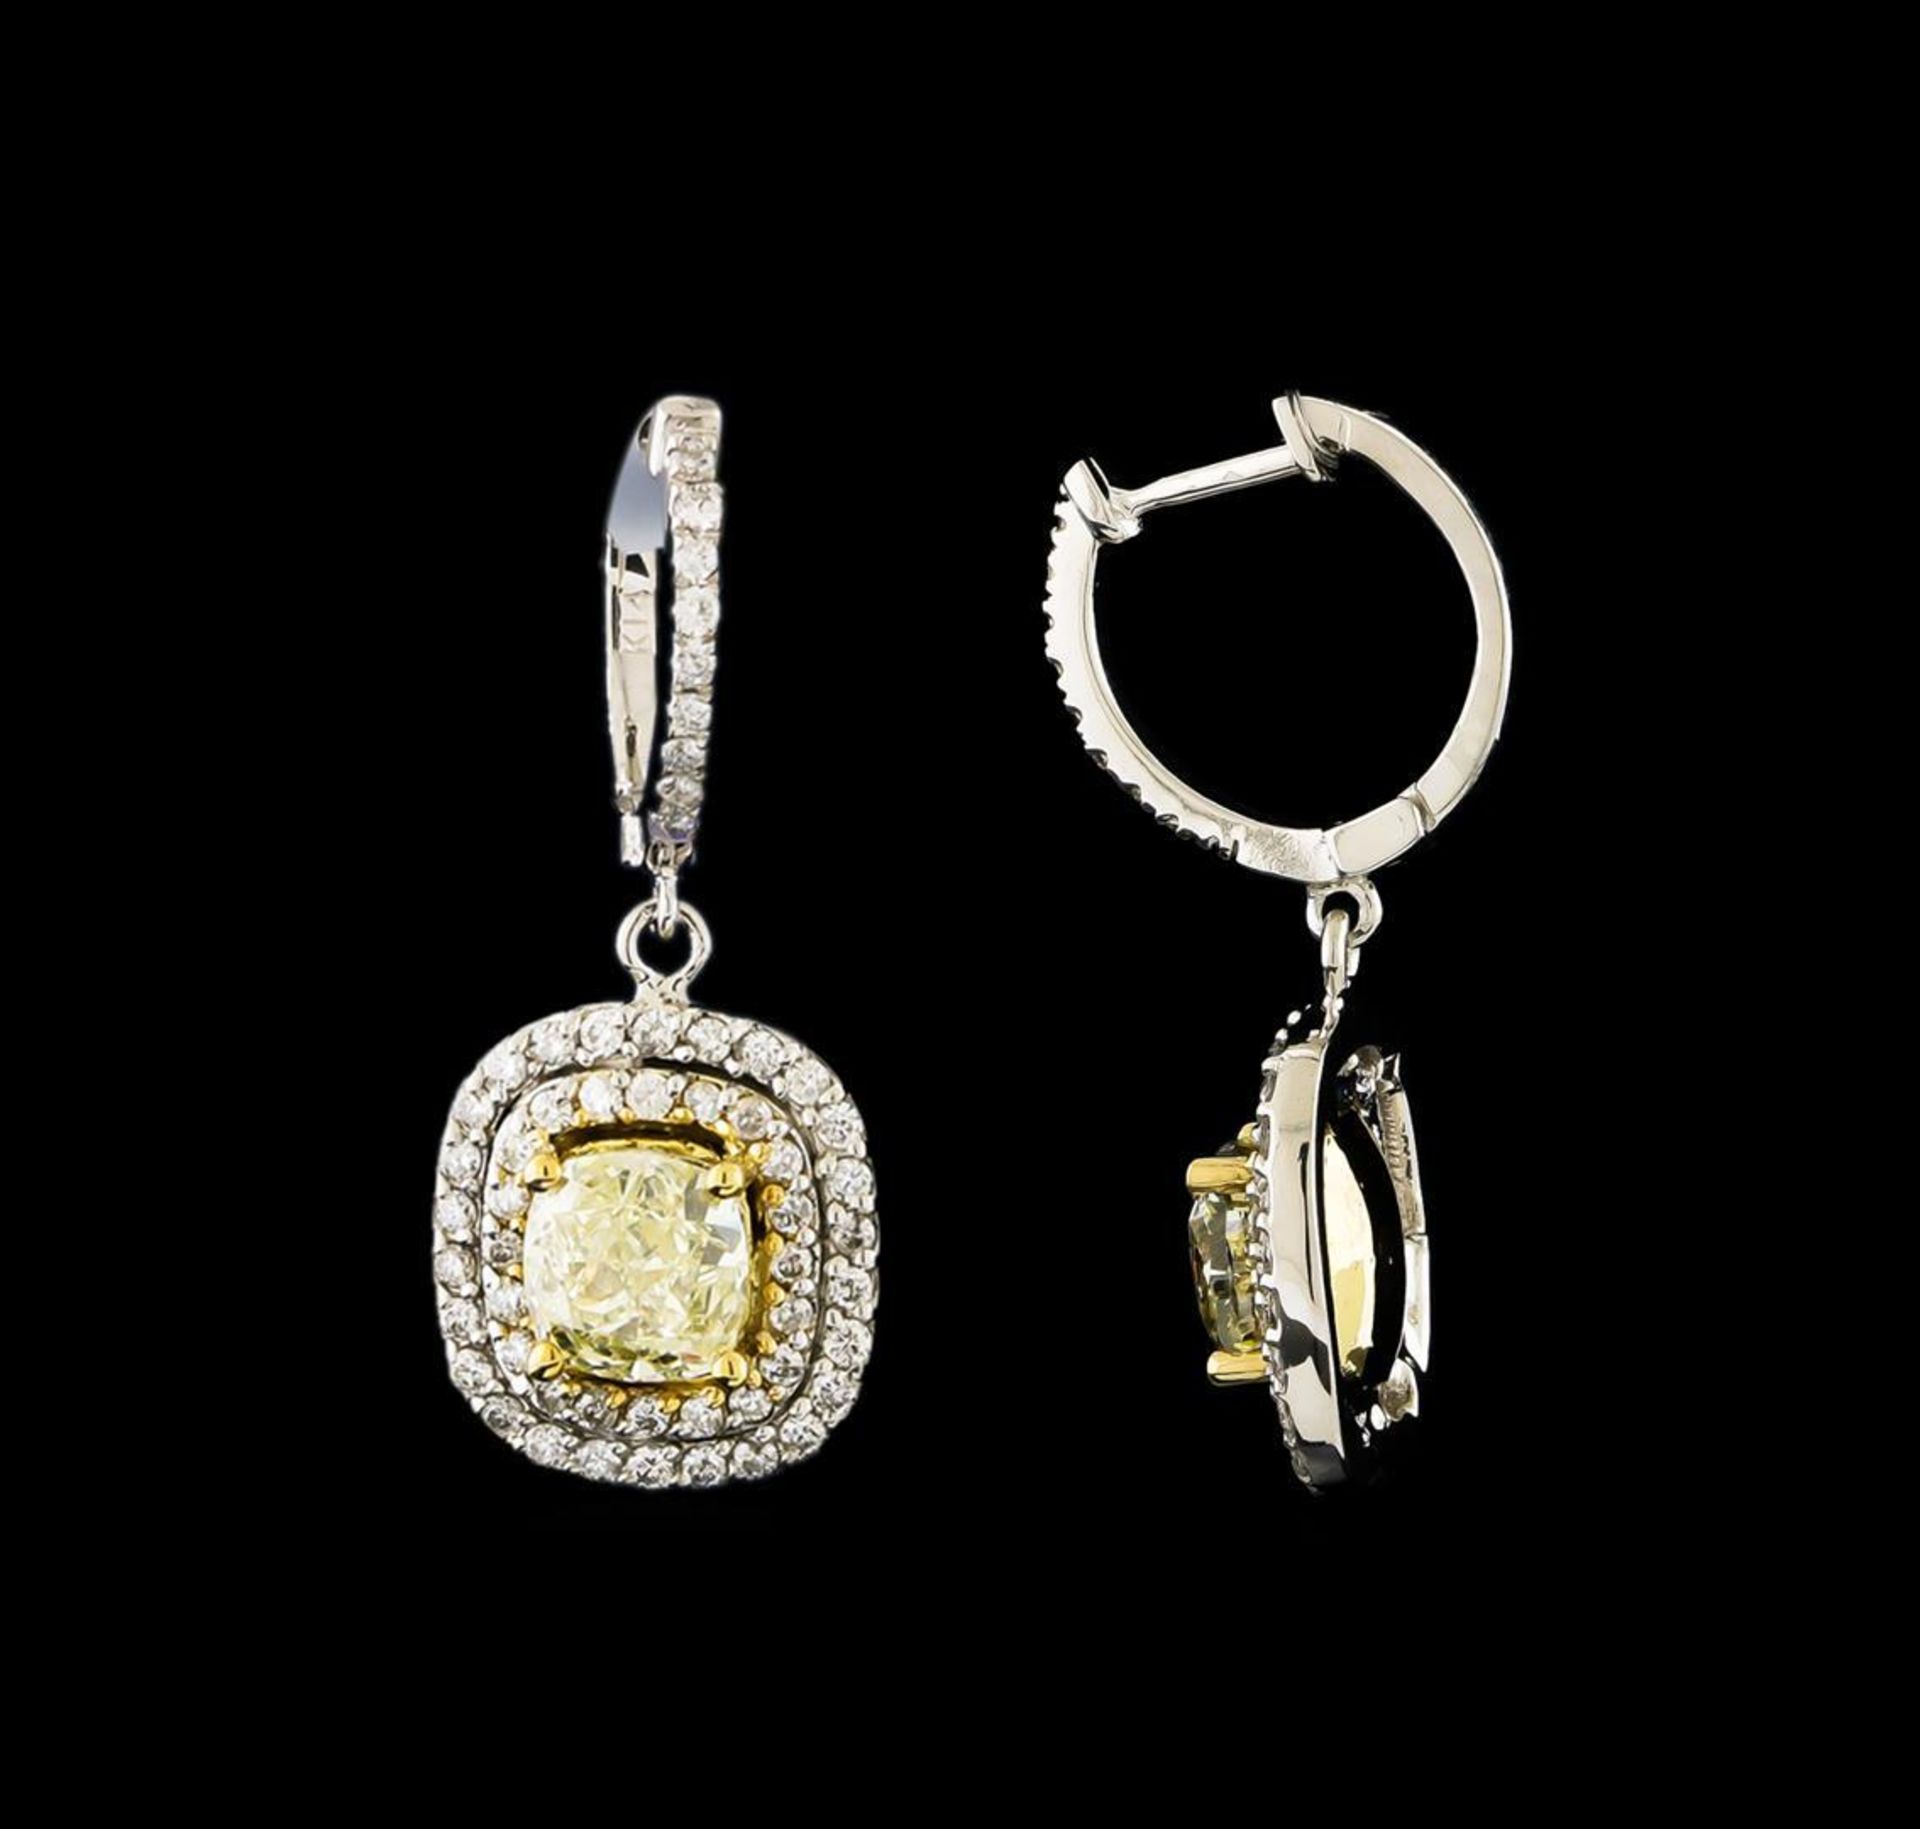 4.08 ctw Fancy Yellow Diamond Earrings - 14KT White and Yellow Gold - Image 2 of 3